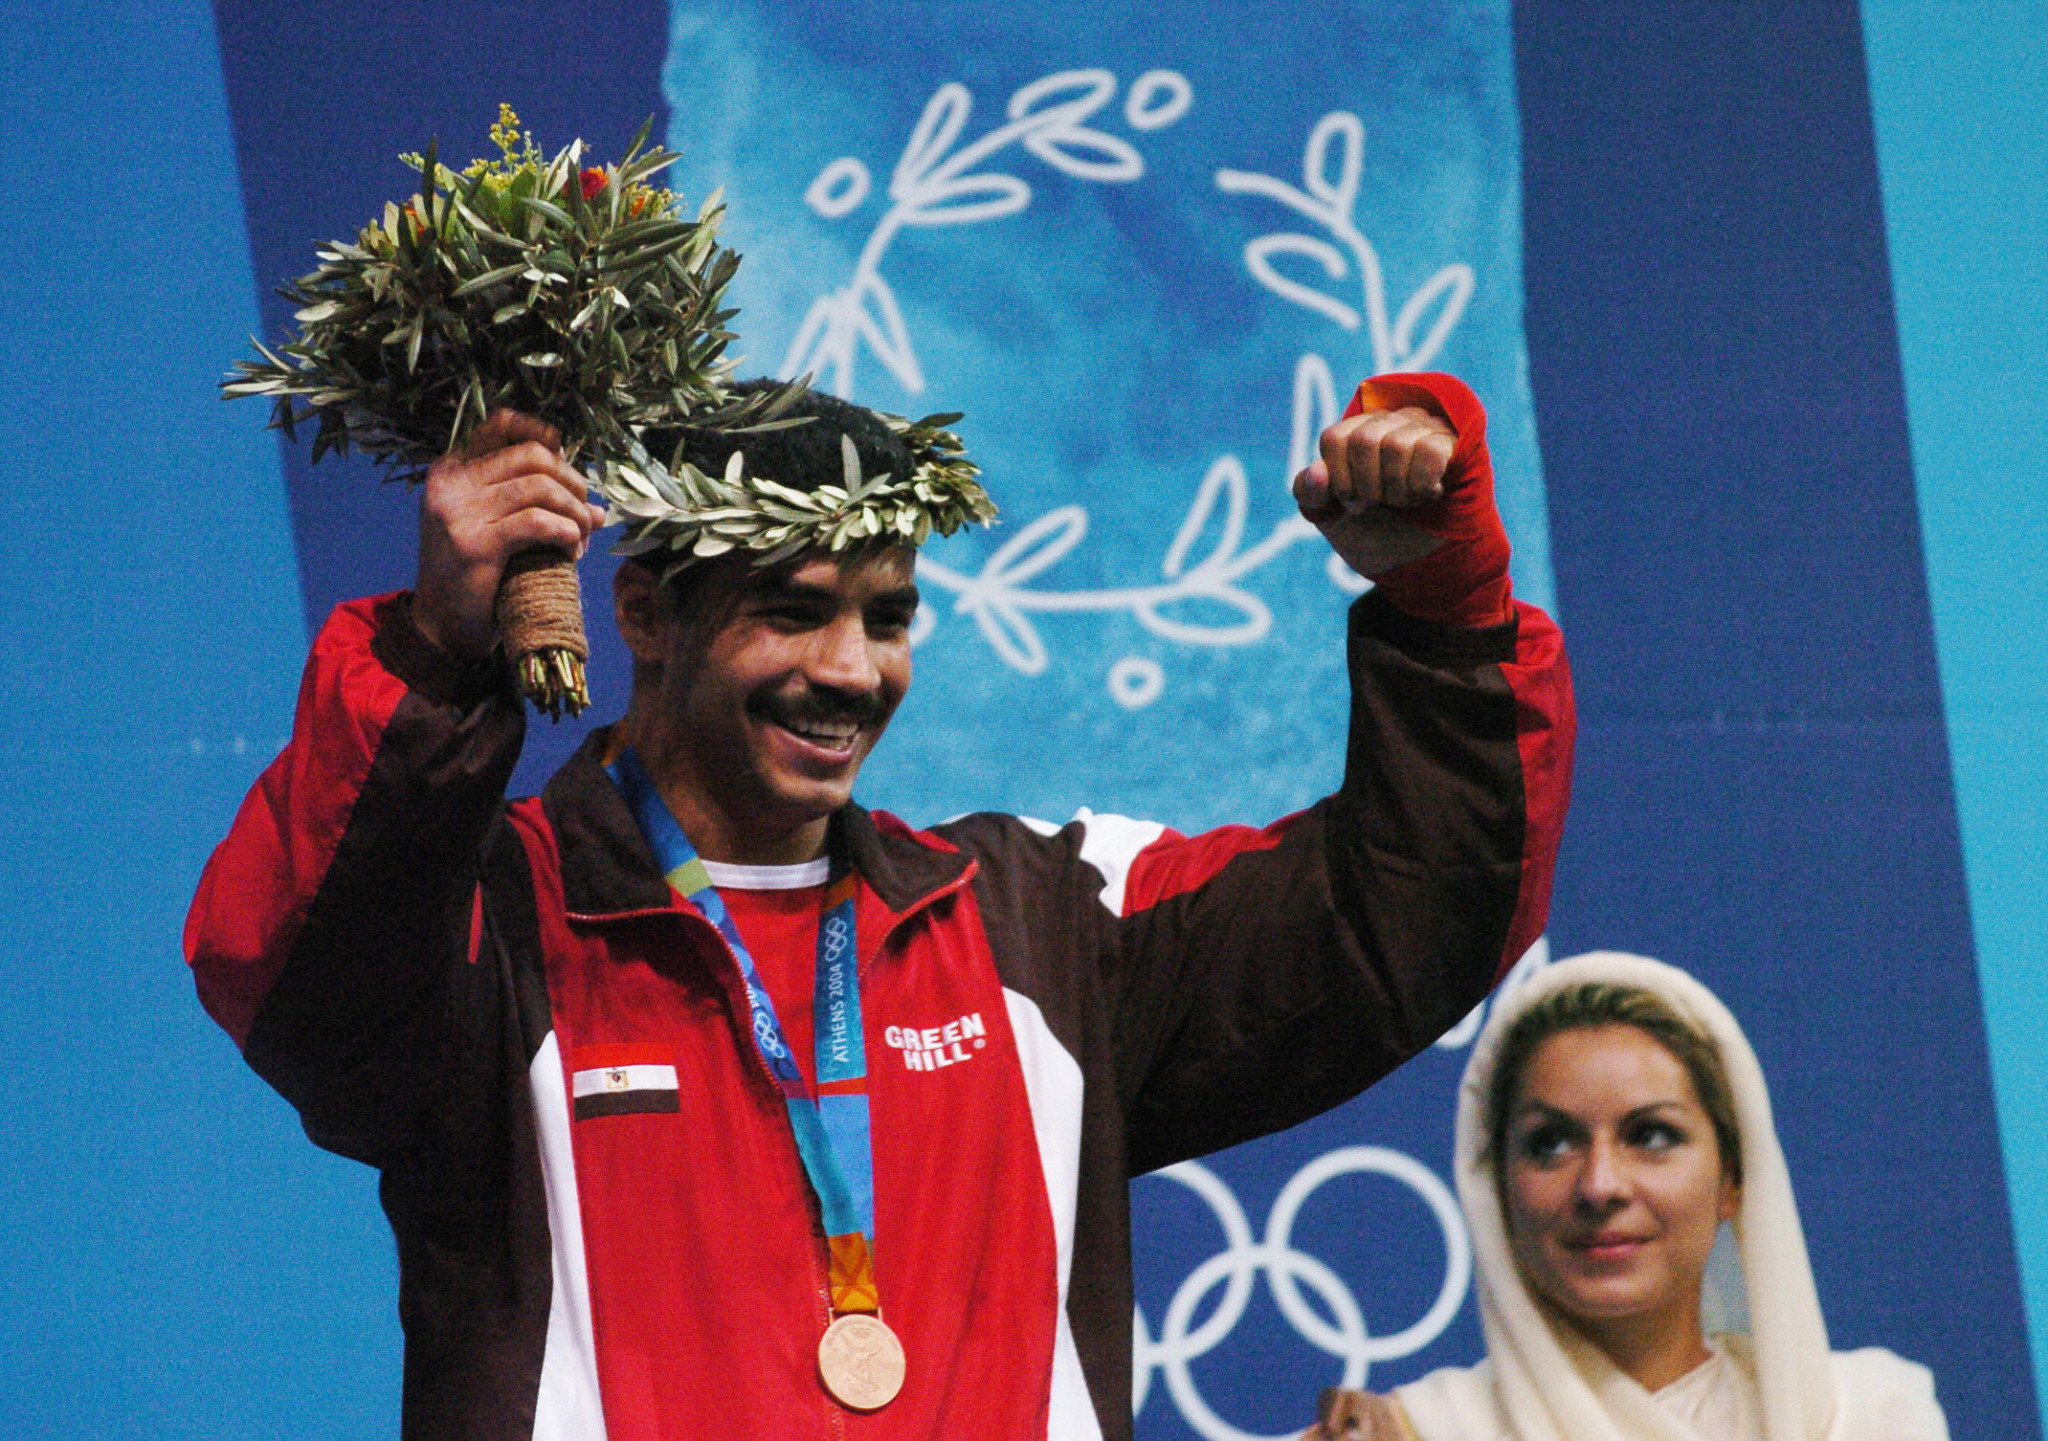 Egypt's last Olympic boxing medals came at Athens 2004, when Mohamed Elsayed was one of three fighters to reach the podium ©Getty Images